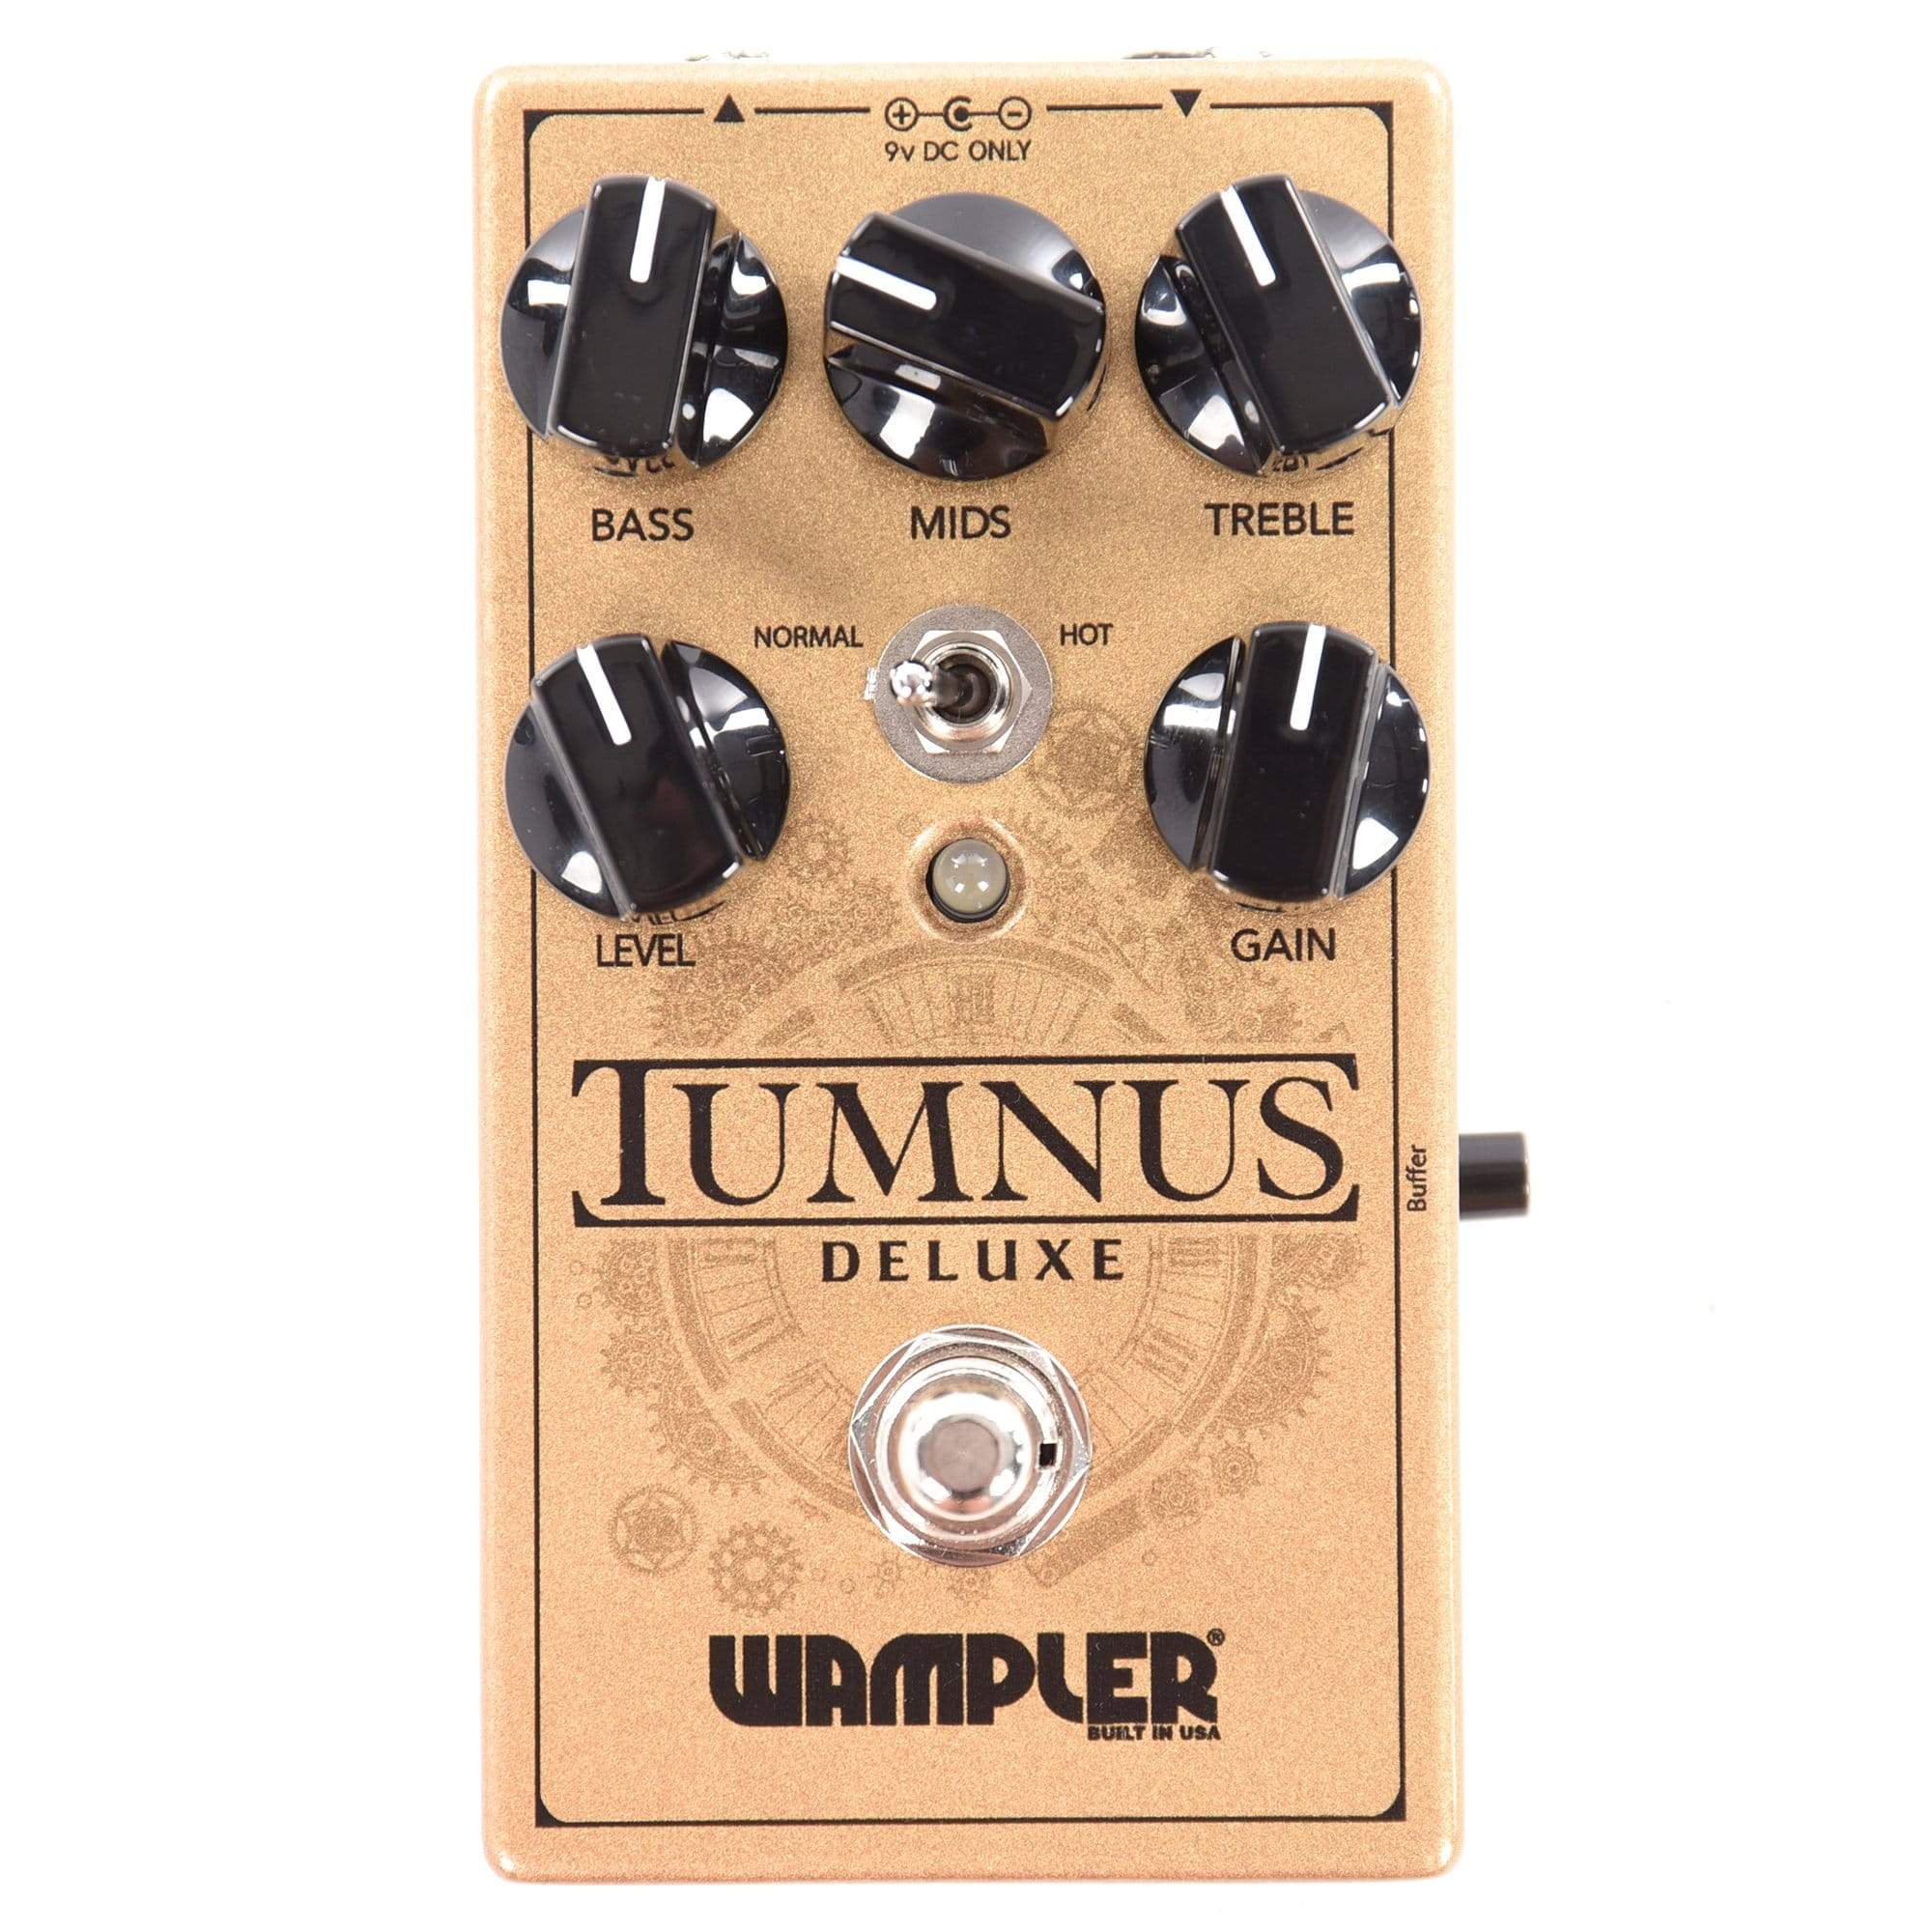 wampler-effects-and-pedals-overdrive-and-boost-wampler-tumnus-deluxe-overdrive-pedal-v2-wamptumdlx-v2-17217232568455_2000x